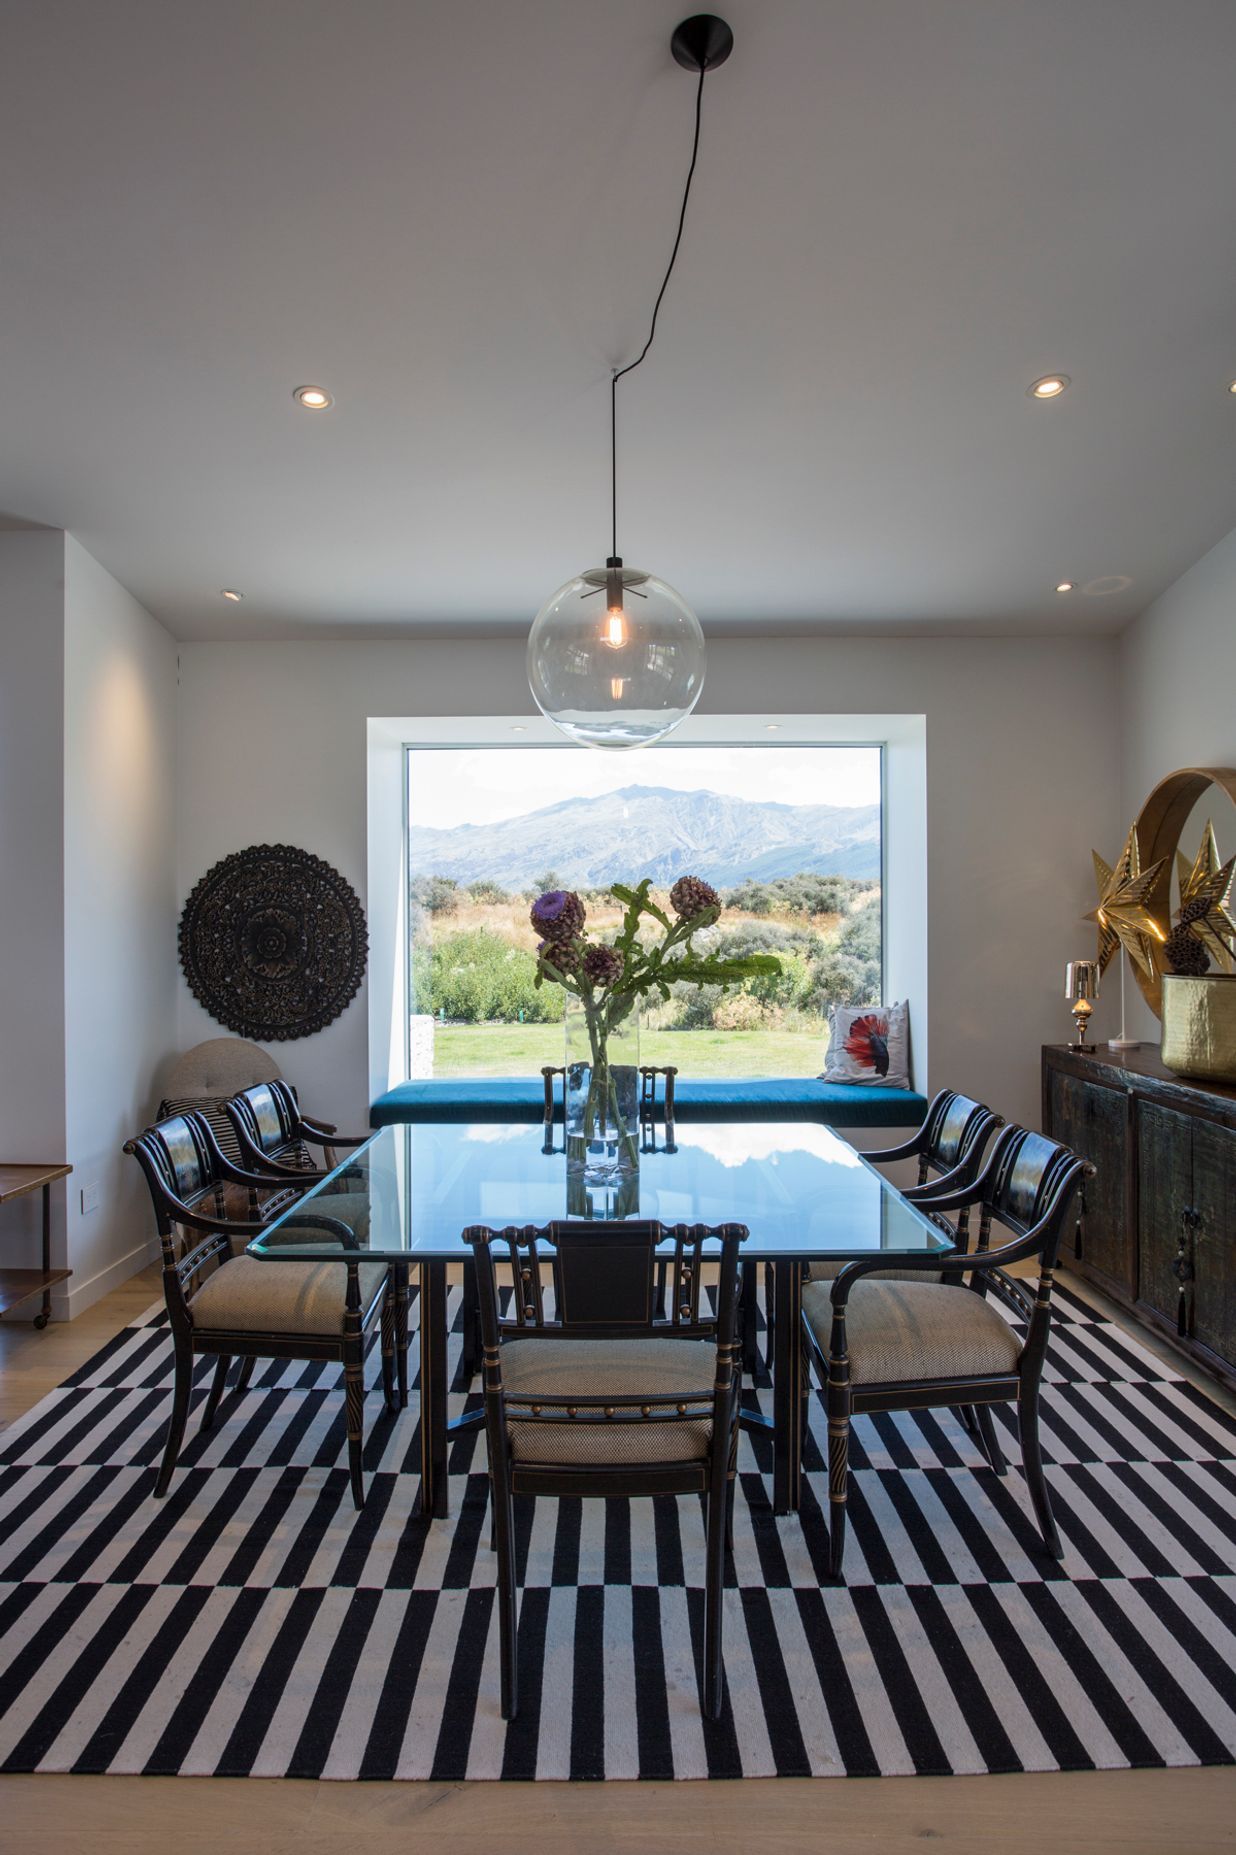 A large picture window frames the formal dining area creating a vignette of the view beyond.